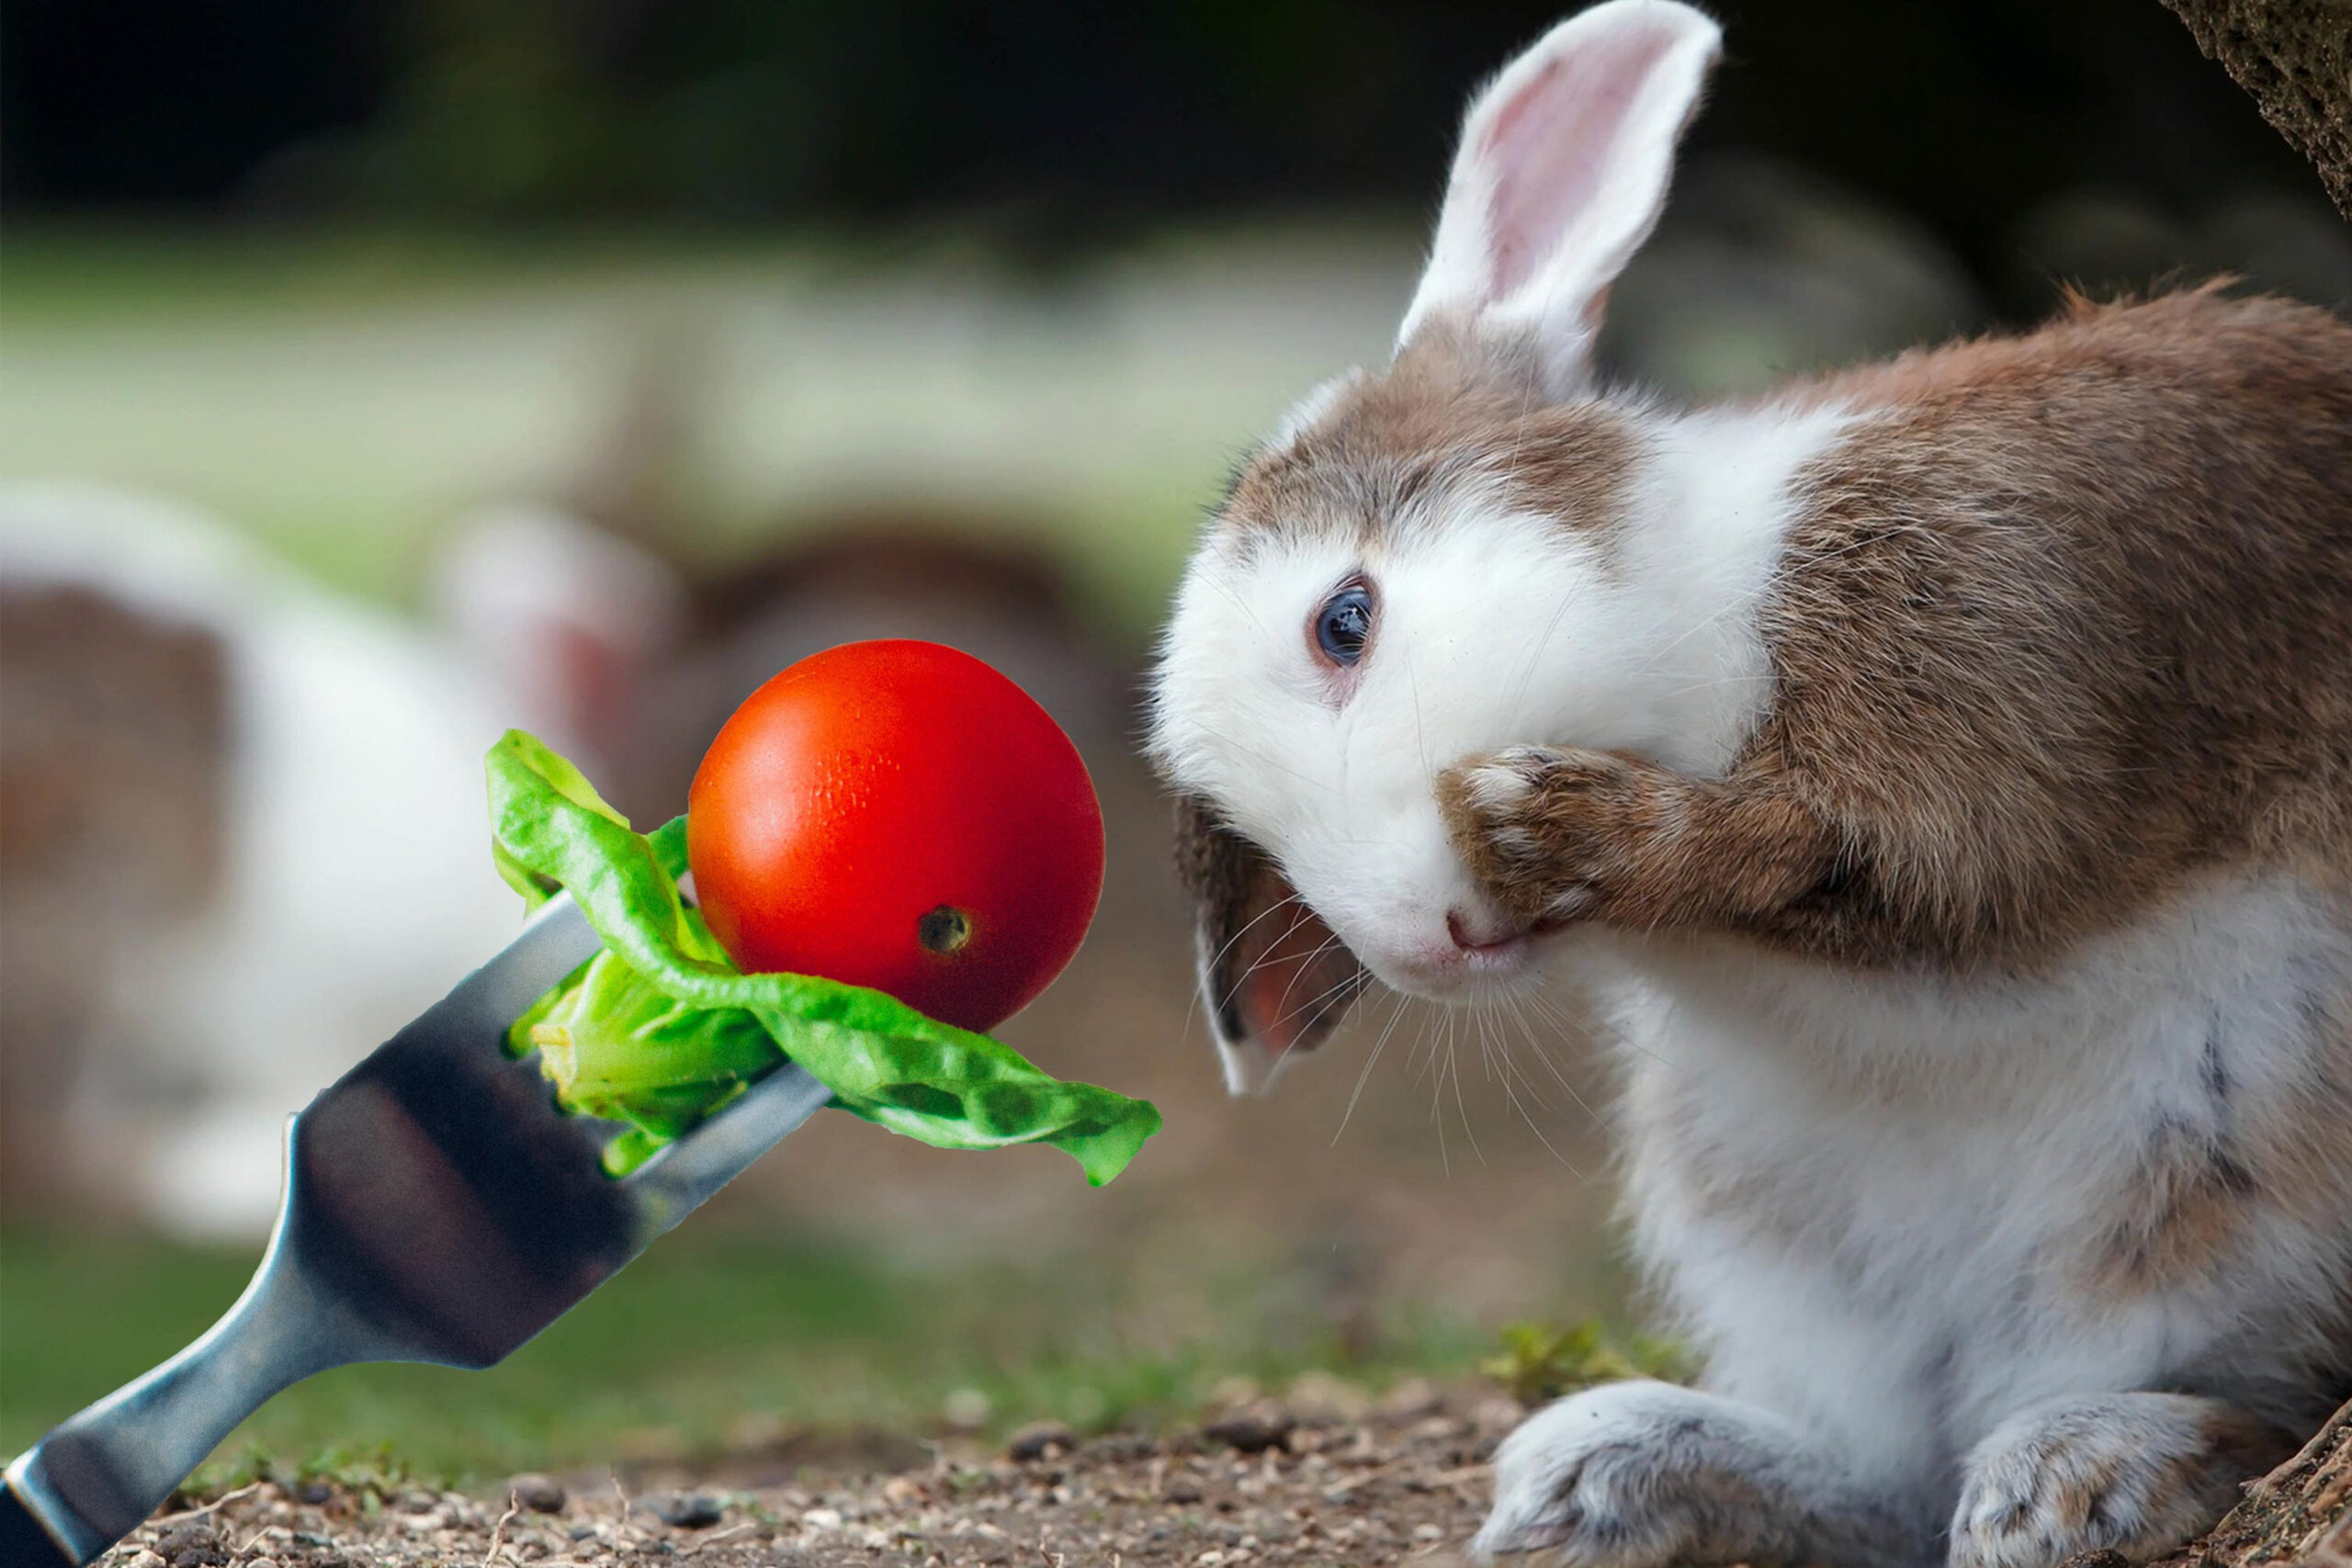 Can Rabbits Eat Tomatoes? - Fruit Rabbits Can Eat